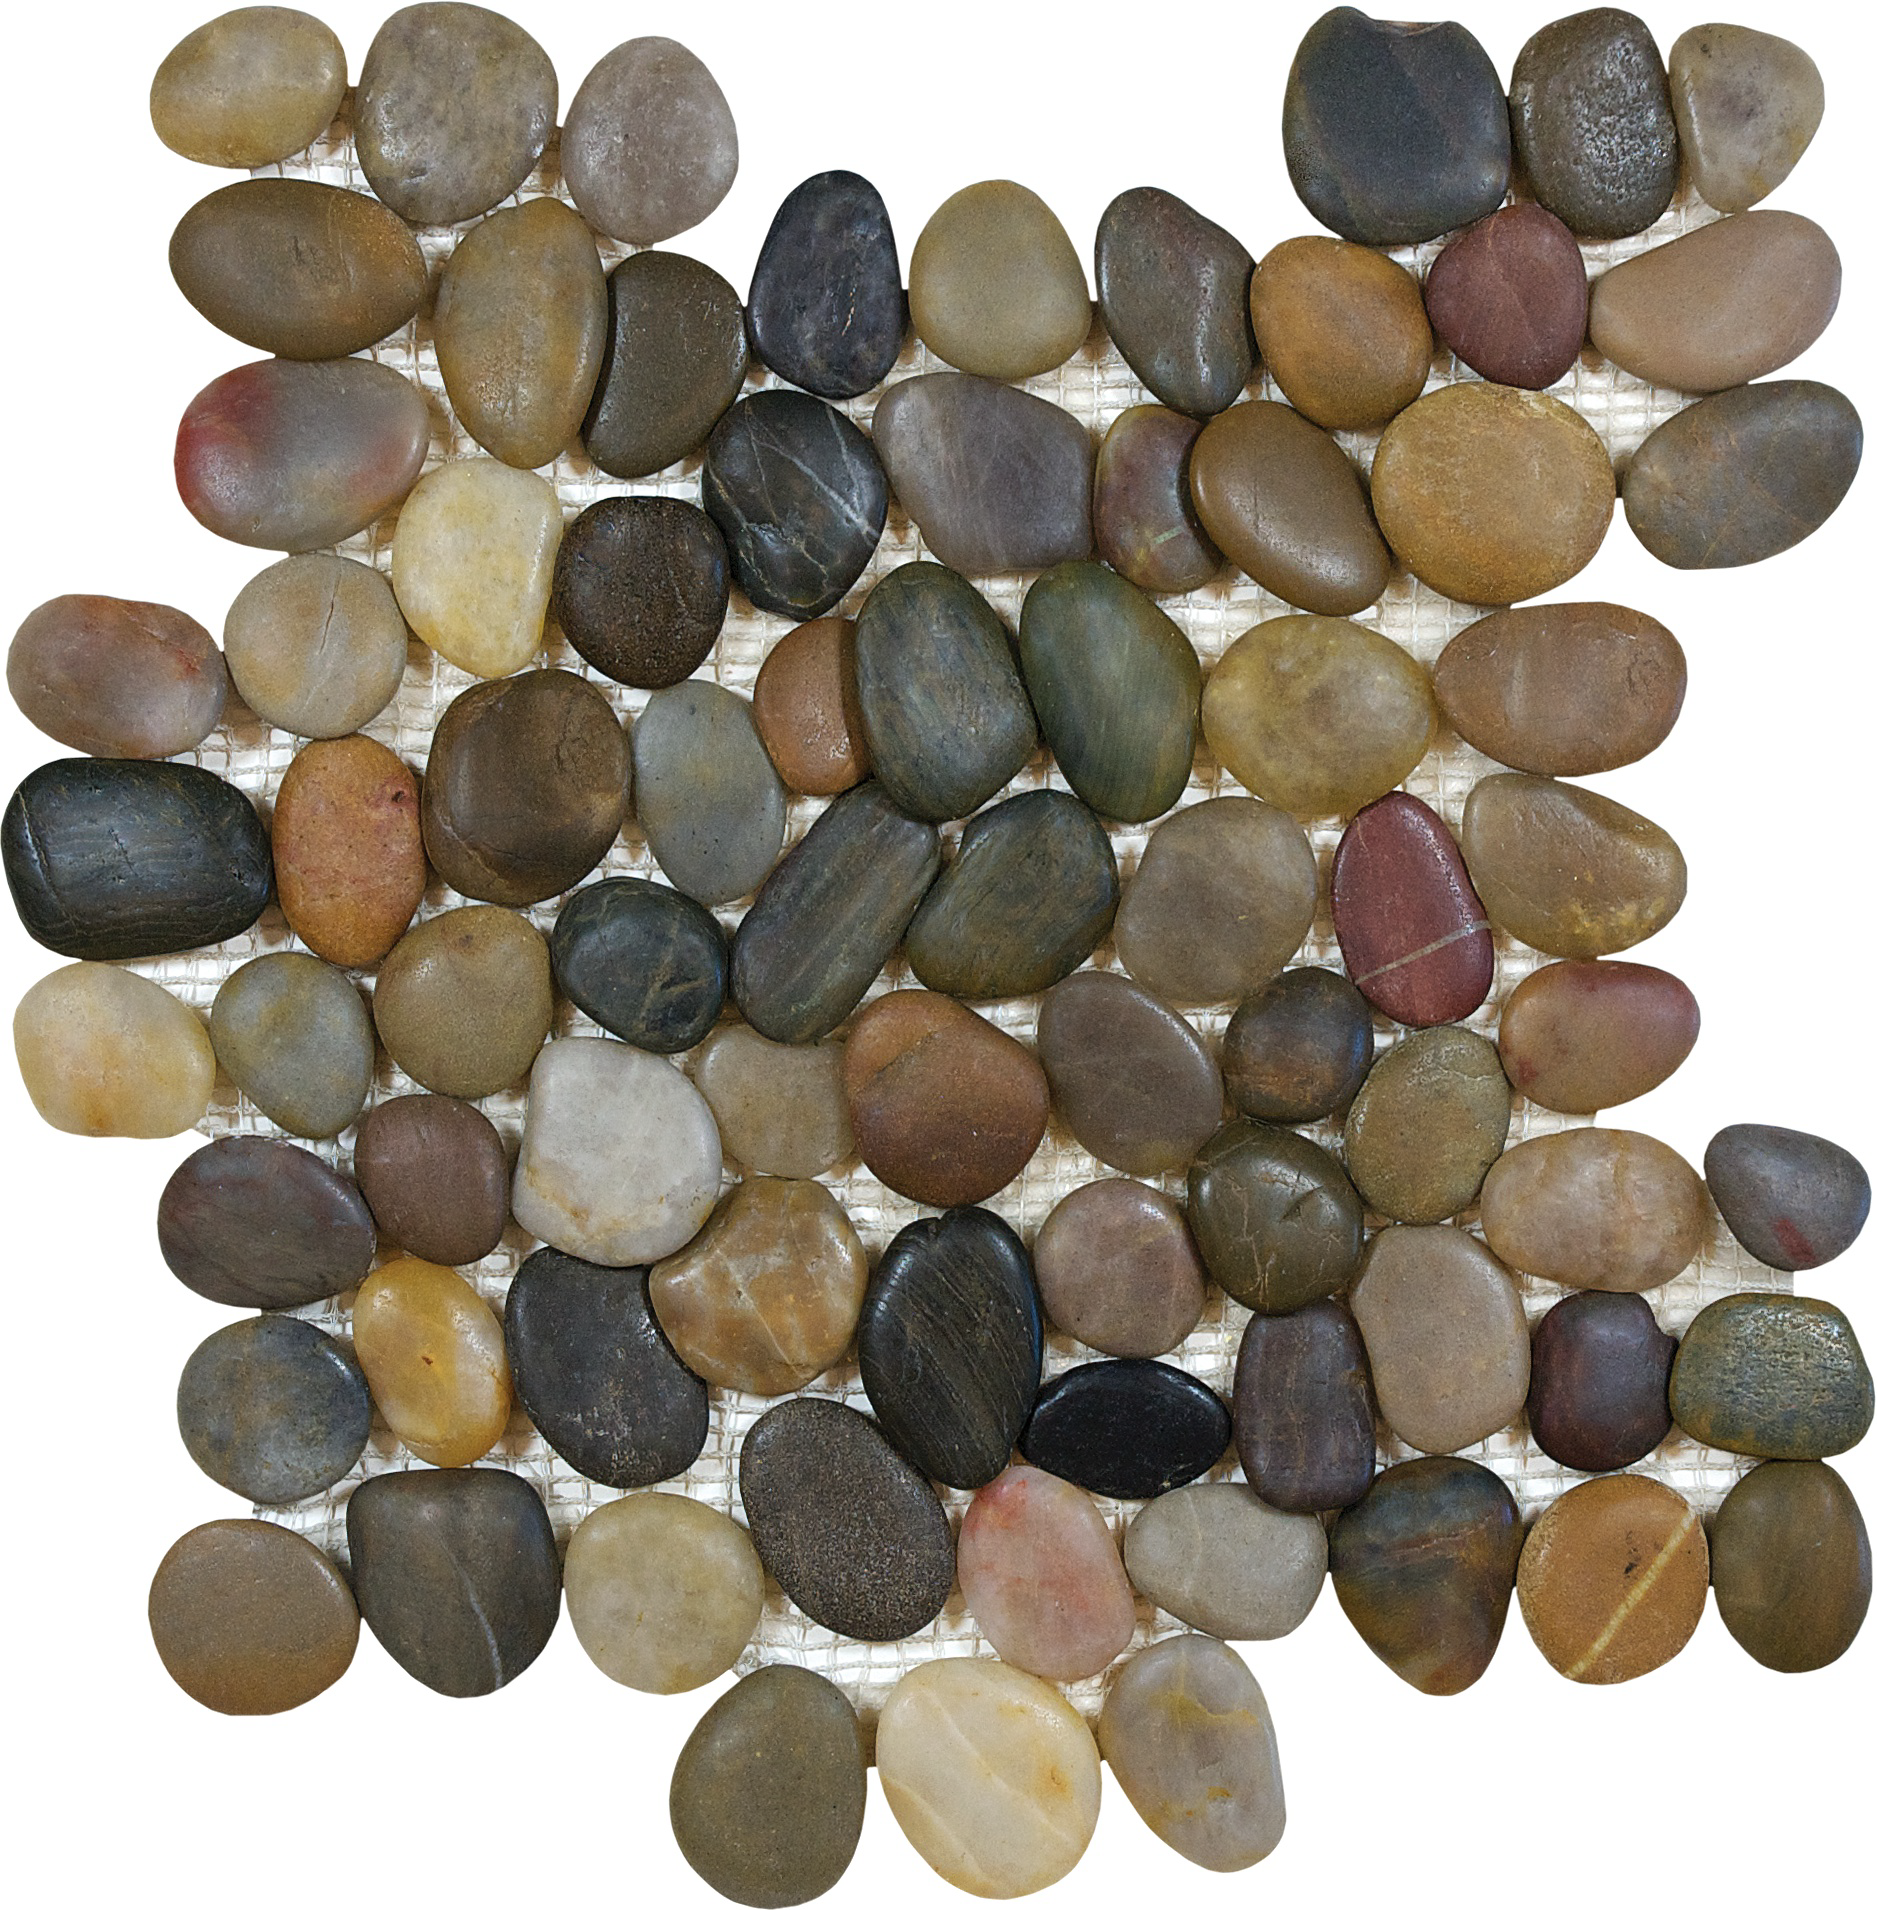 pebble bora wilderness natural pebble pattern natural stone mosaic from zen anatolia collection distributed by surface group international matte finish straight edge edge mesh shape